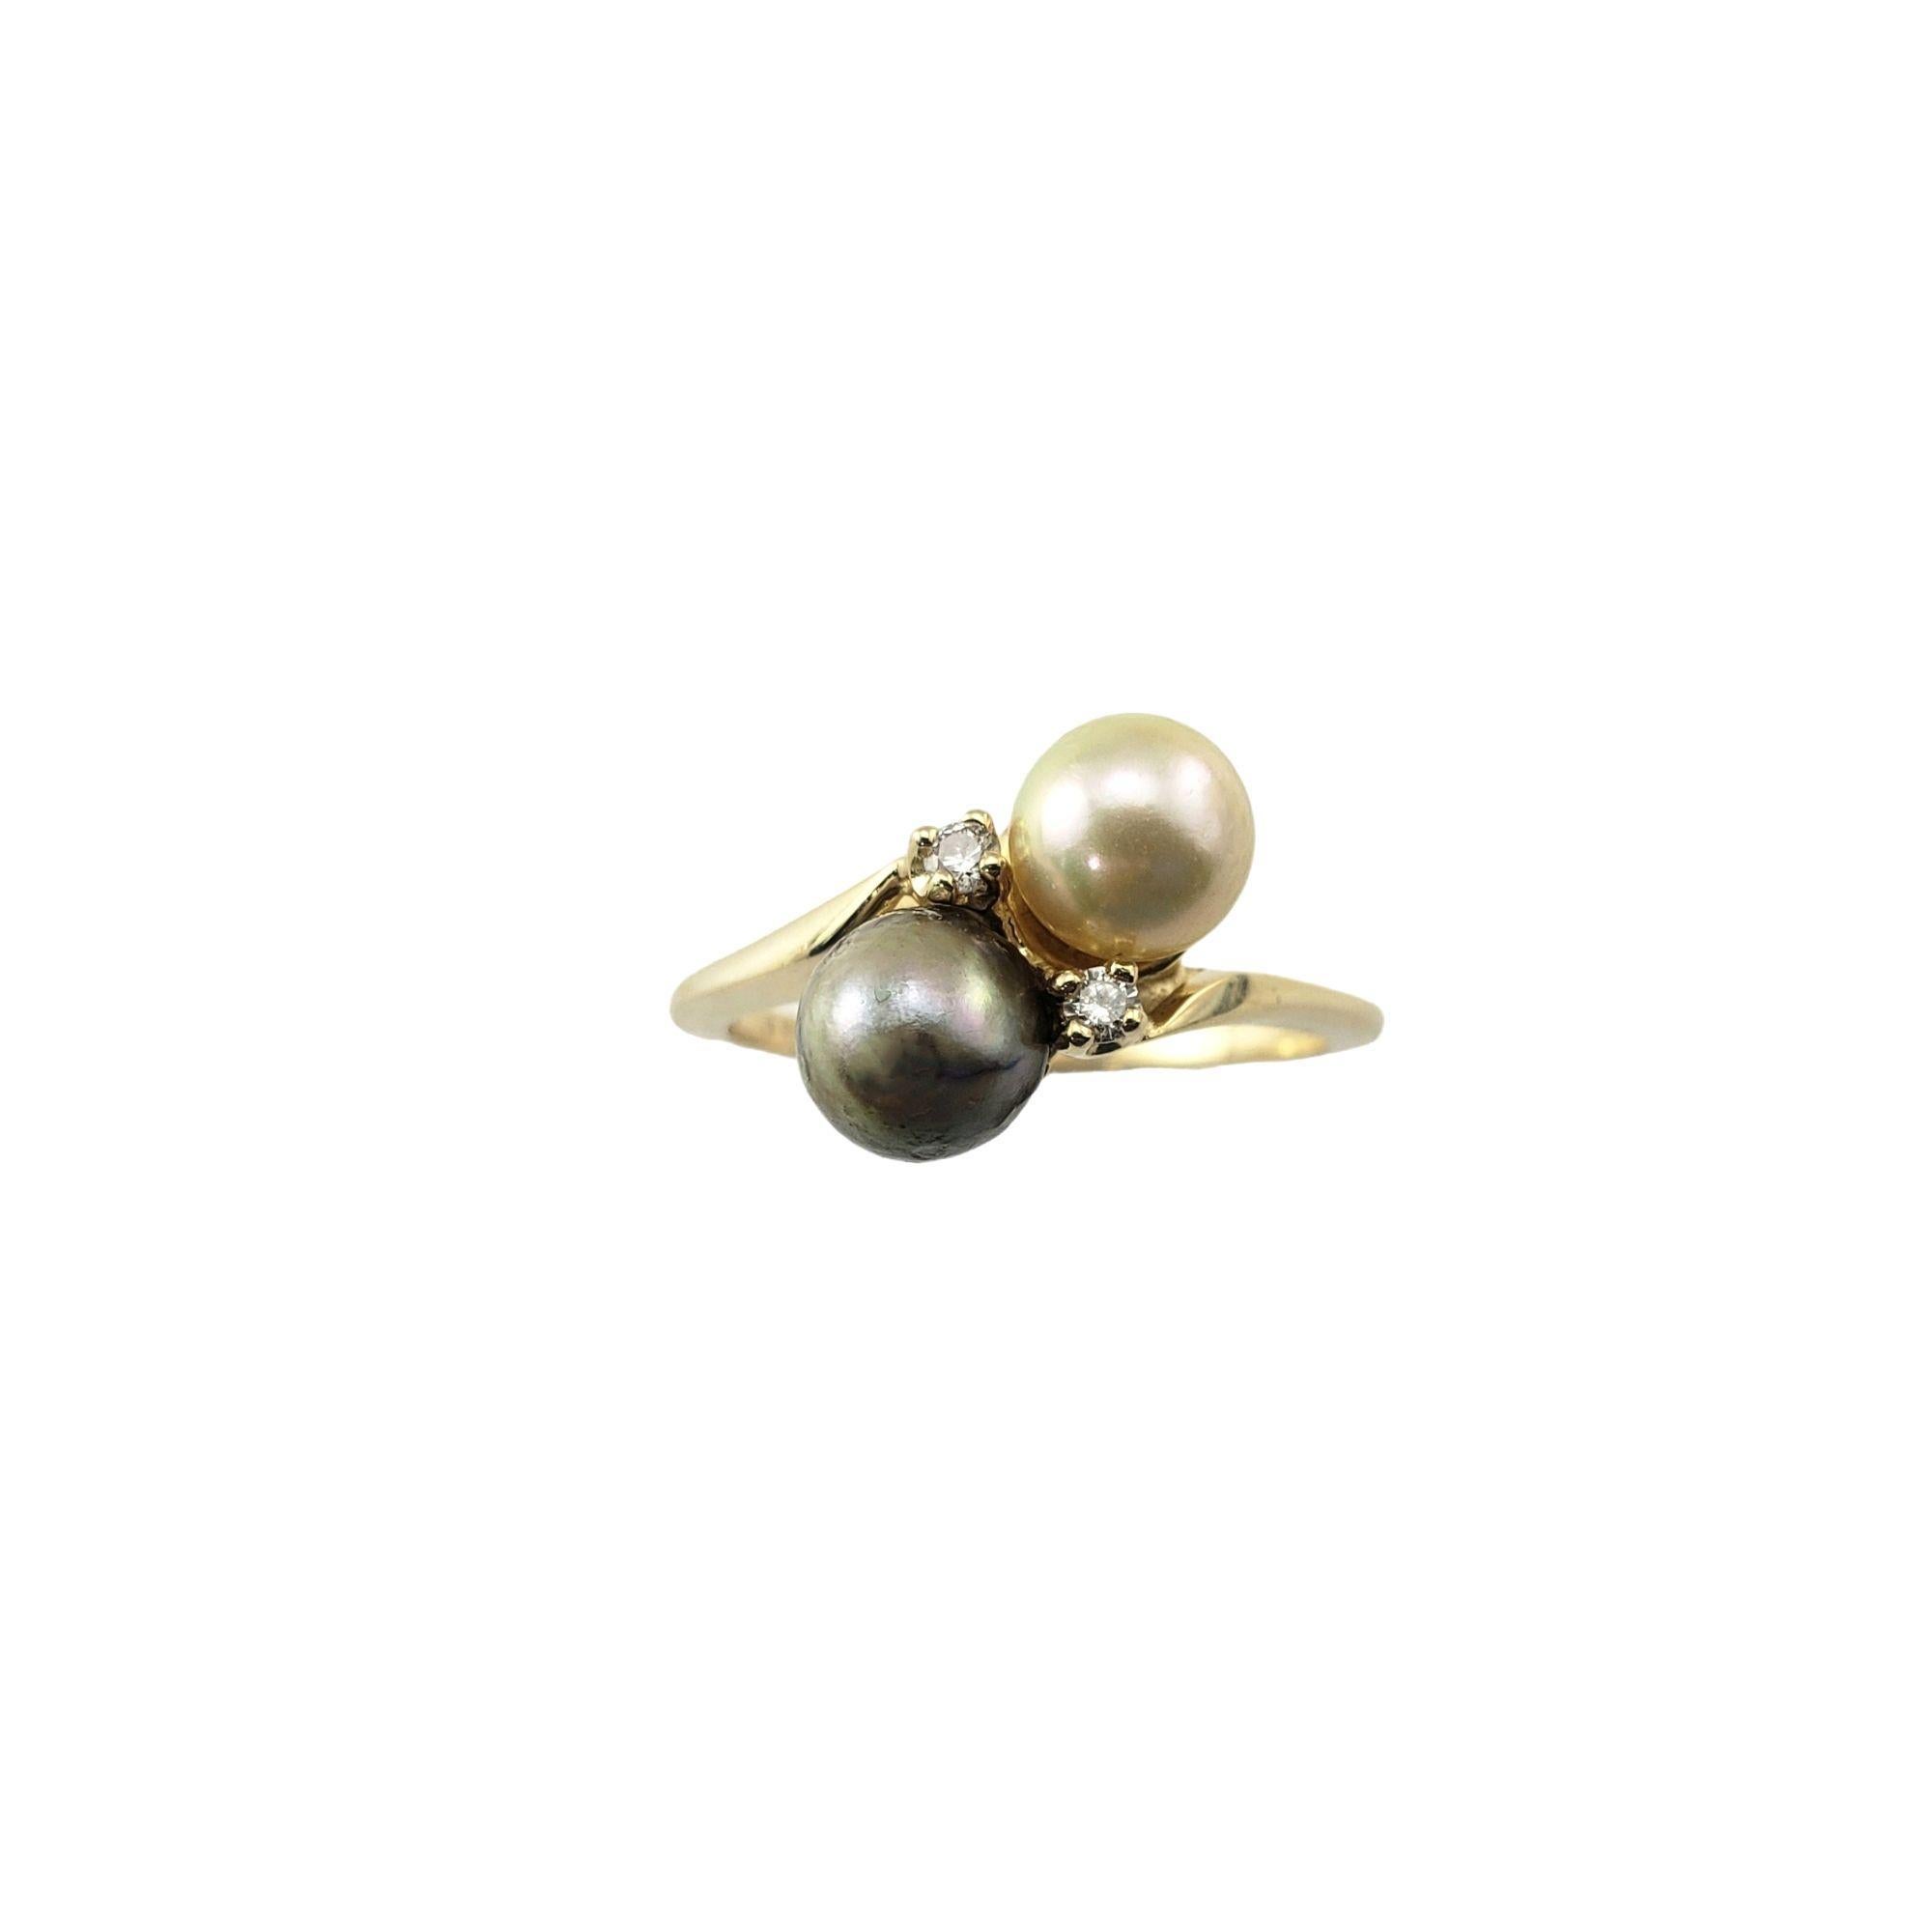 14 Karat Yellow Gold Pearl and Diamond Ring Size 8

This elegant ring features one black pearl, one white pearl (6 mm each) and two round brilliant cut diamonds set in classic 14K yellow gold. 

Approximate total diamond weight: .06 ct.

Diamond